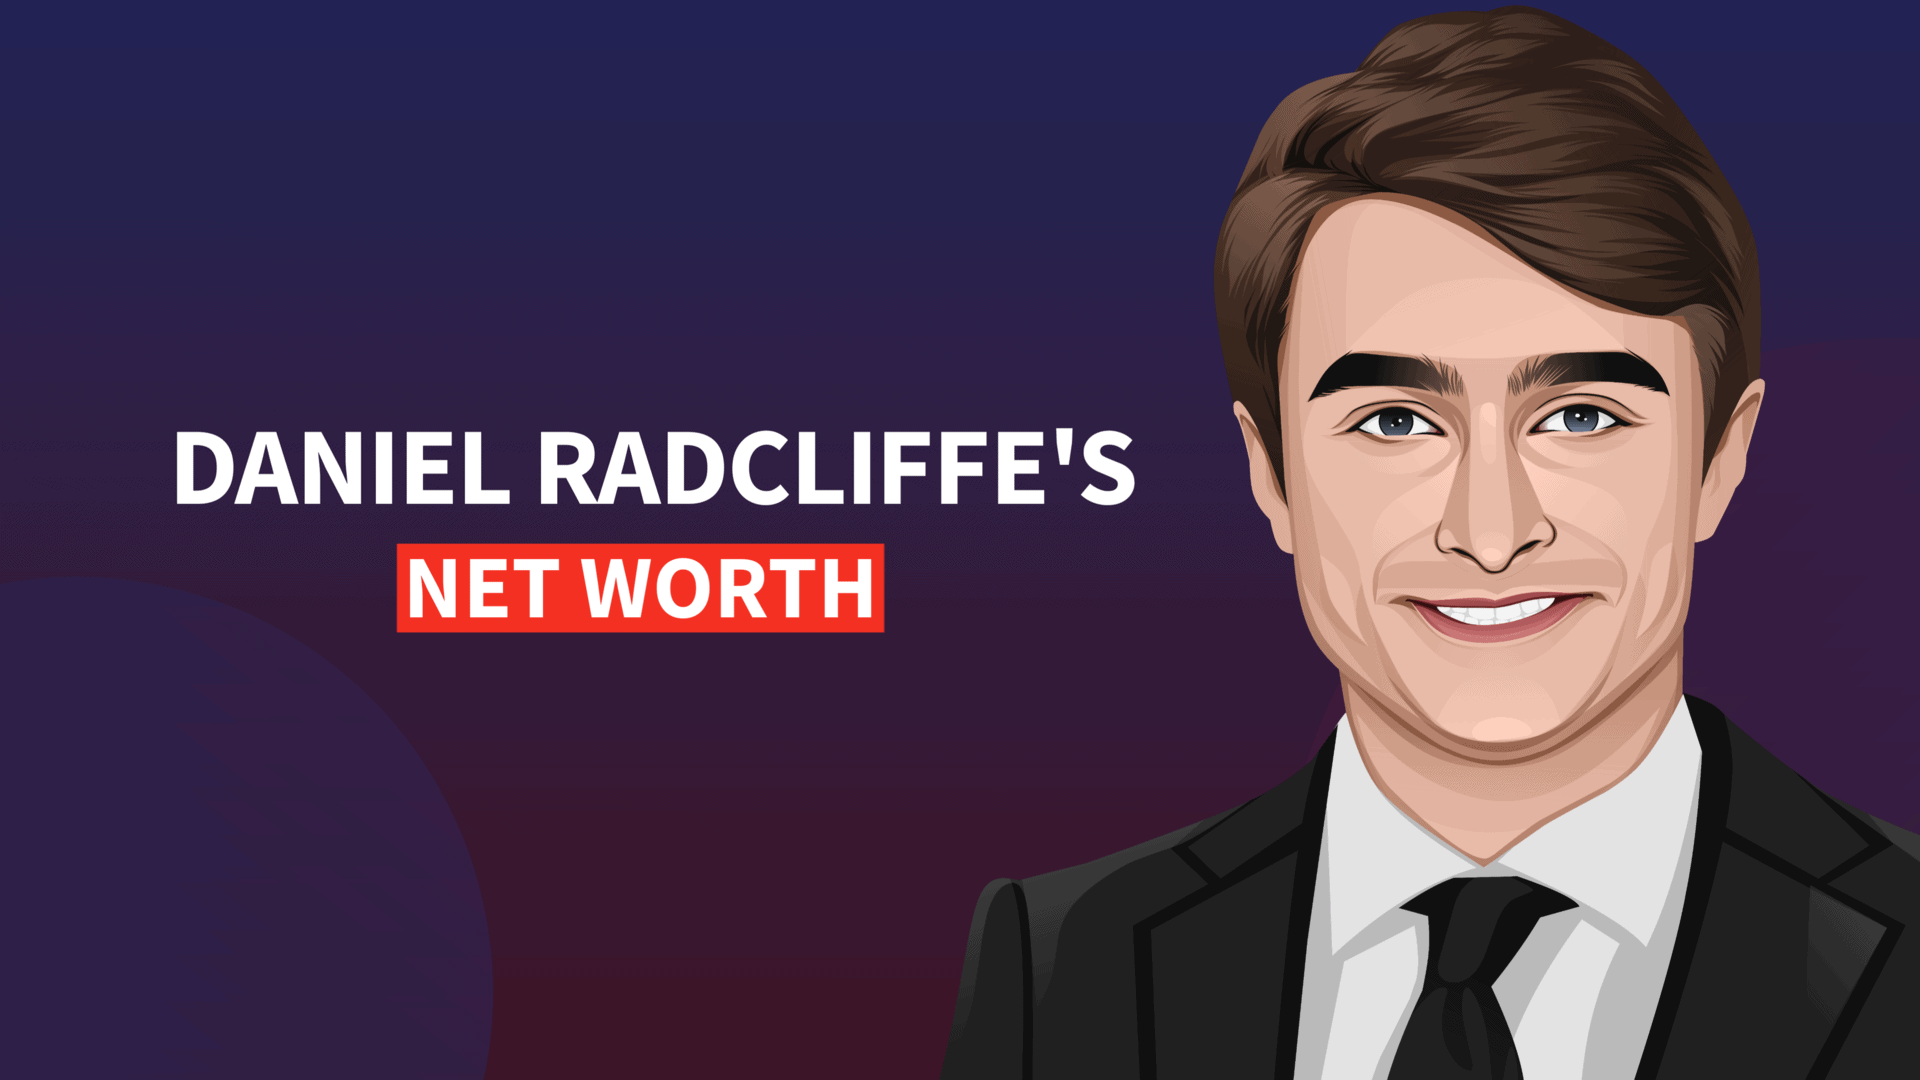 Daniel Radcliffe's Net Worth and Story